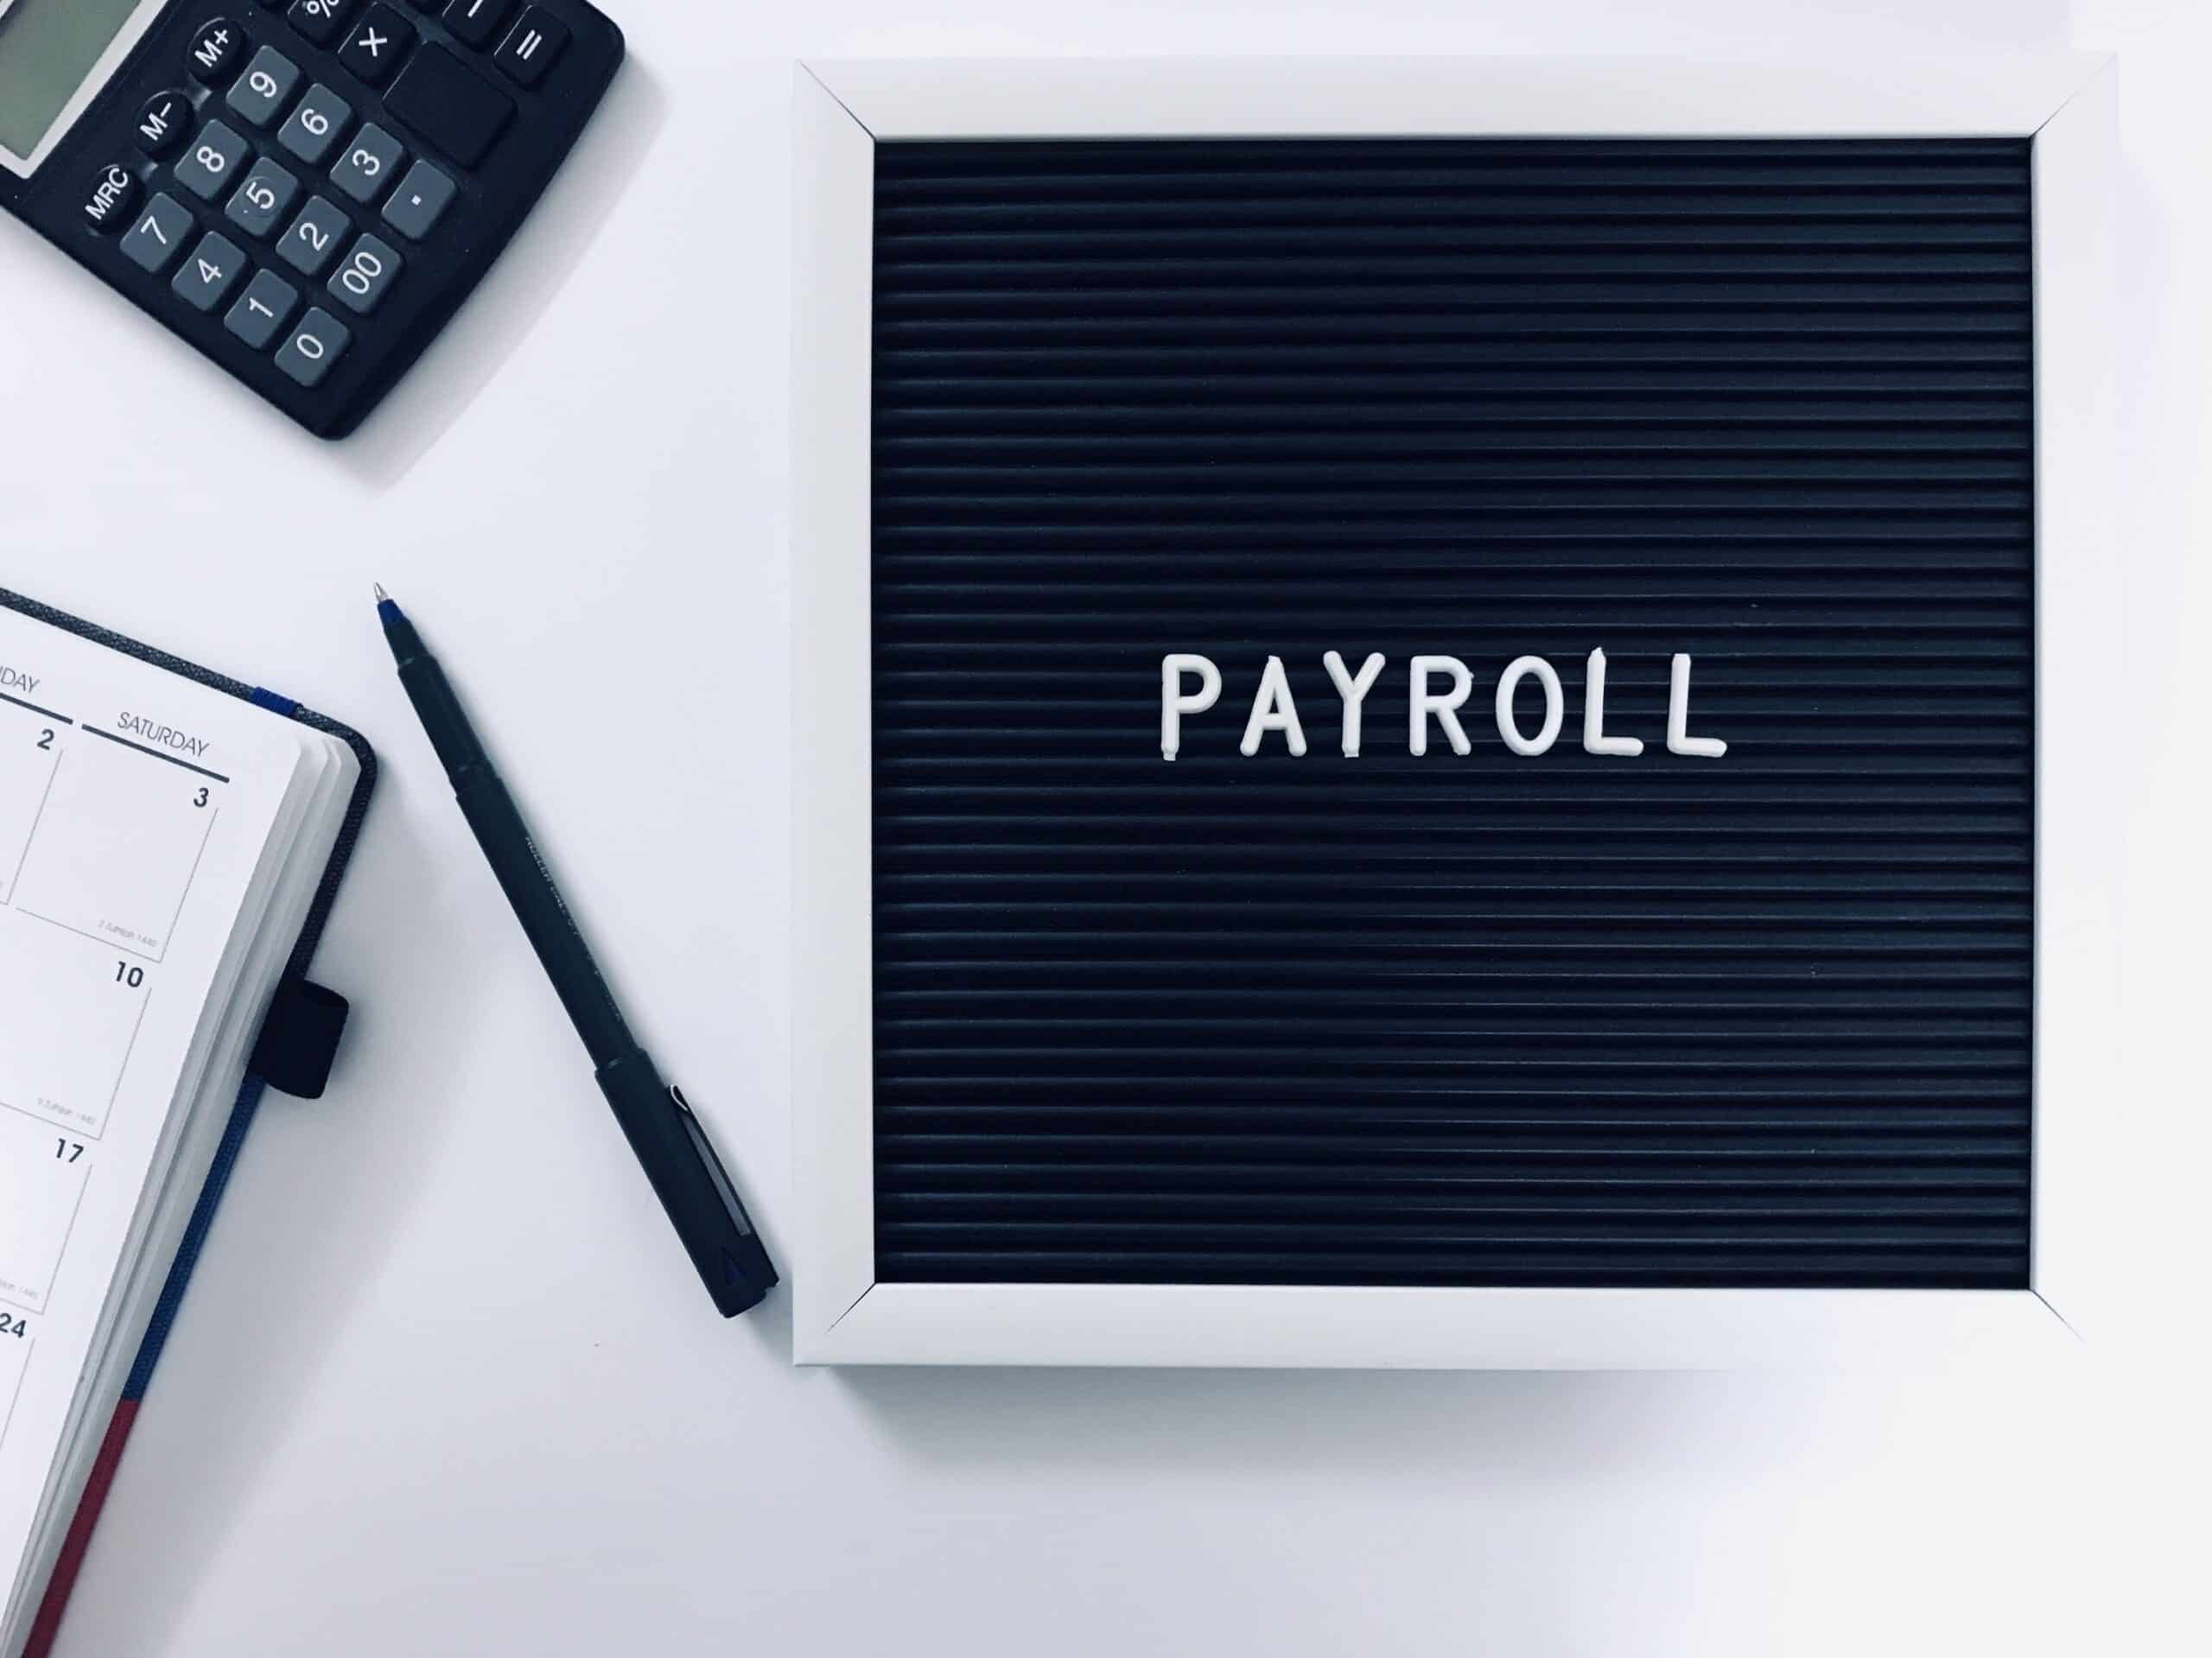 Payroll Management Services Provider Company | OPS